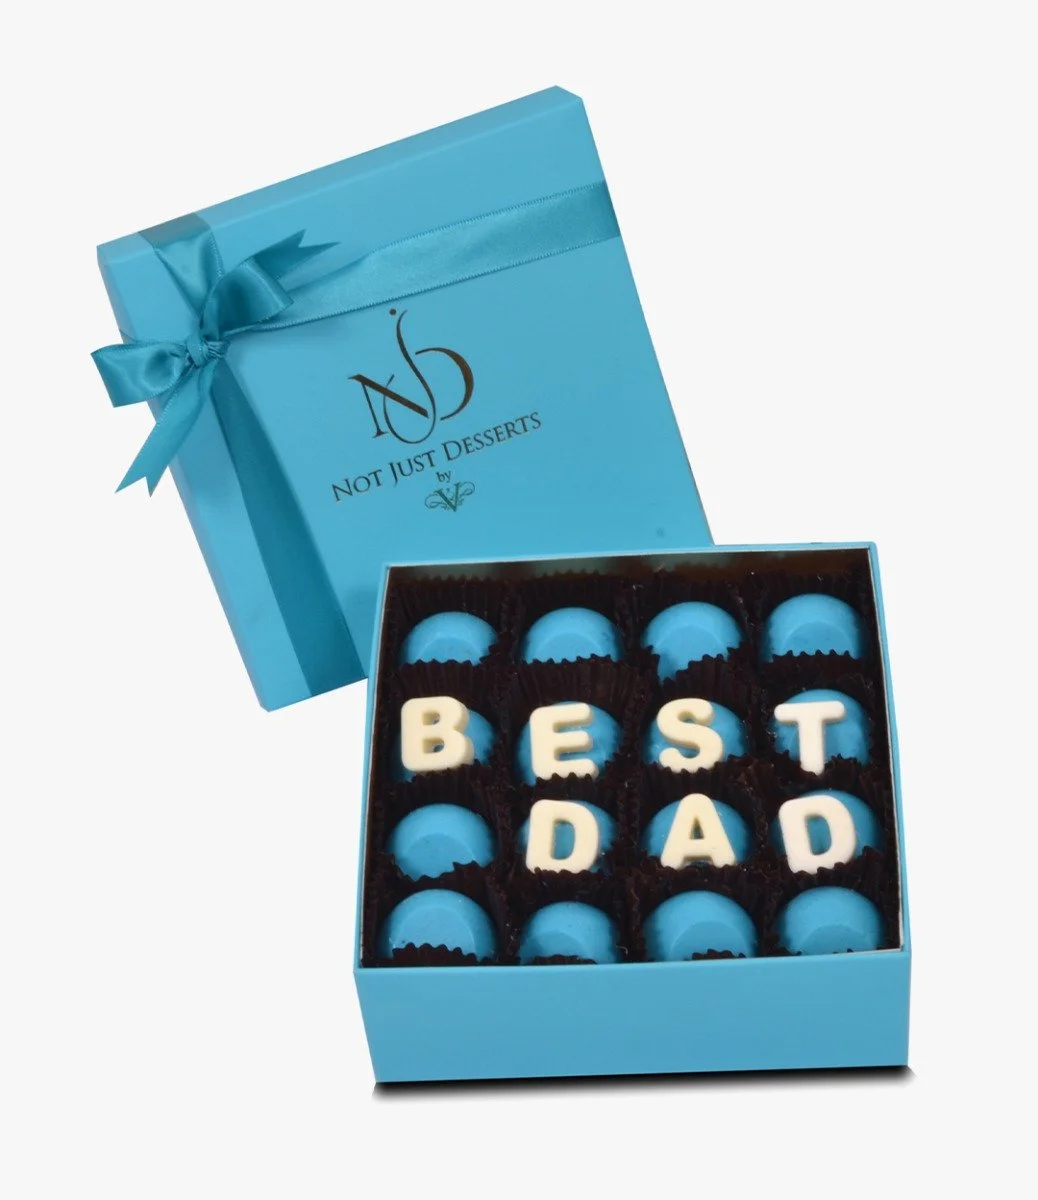 Blue & White Best Dad Chocolate Box by NJD